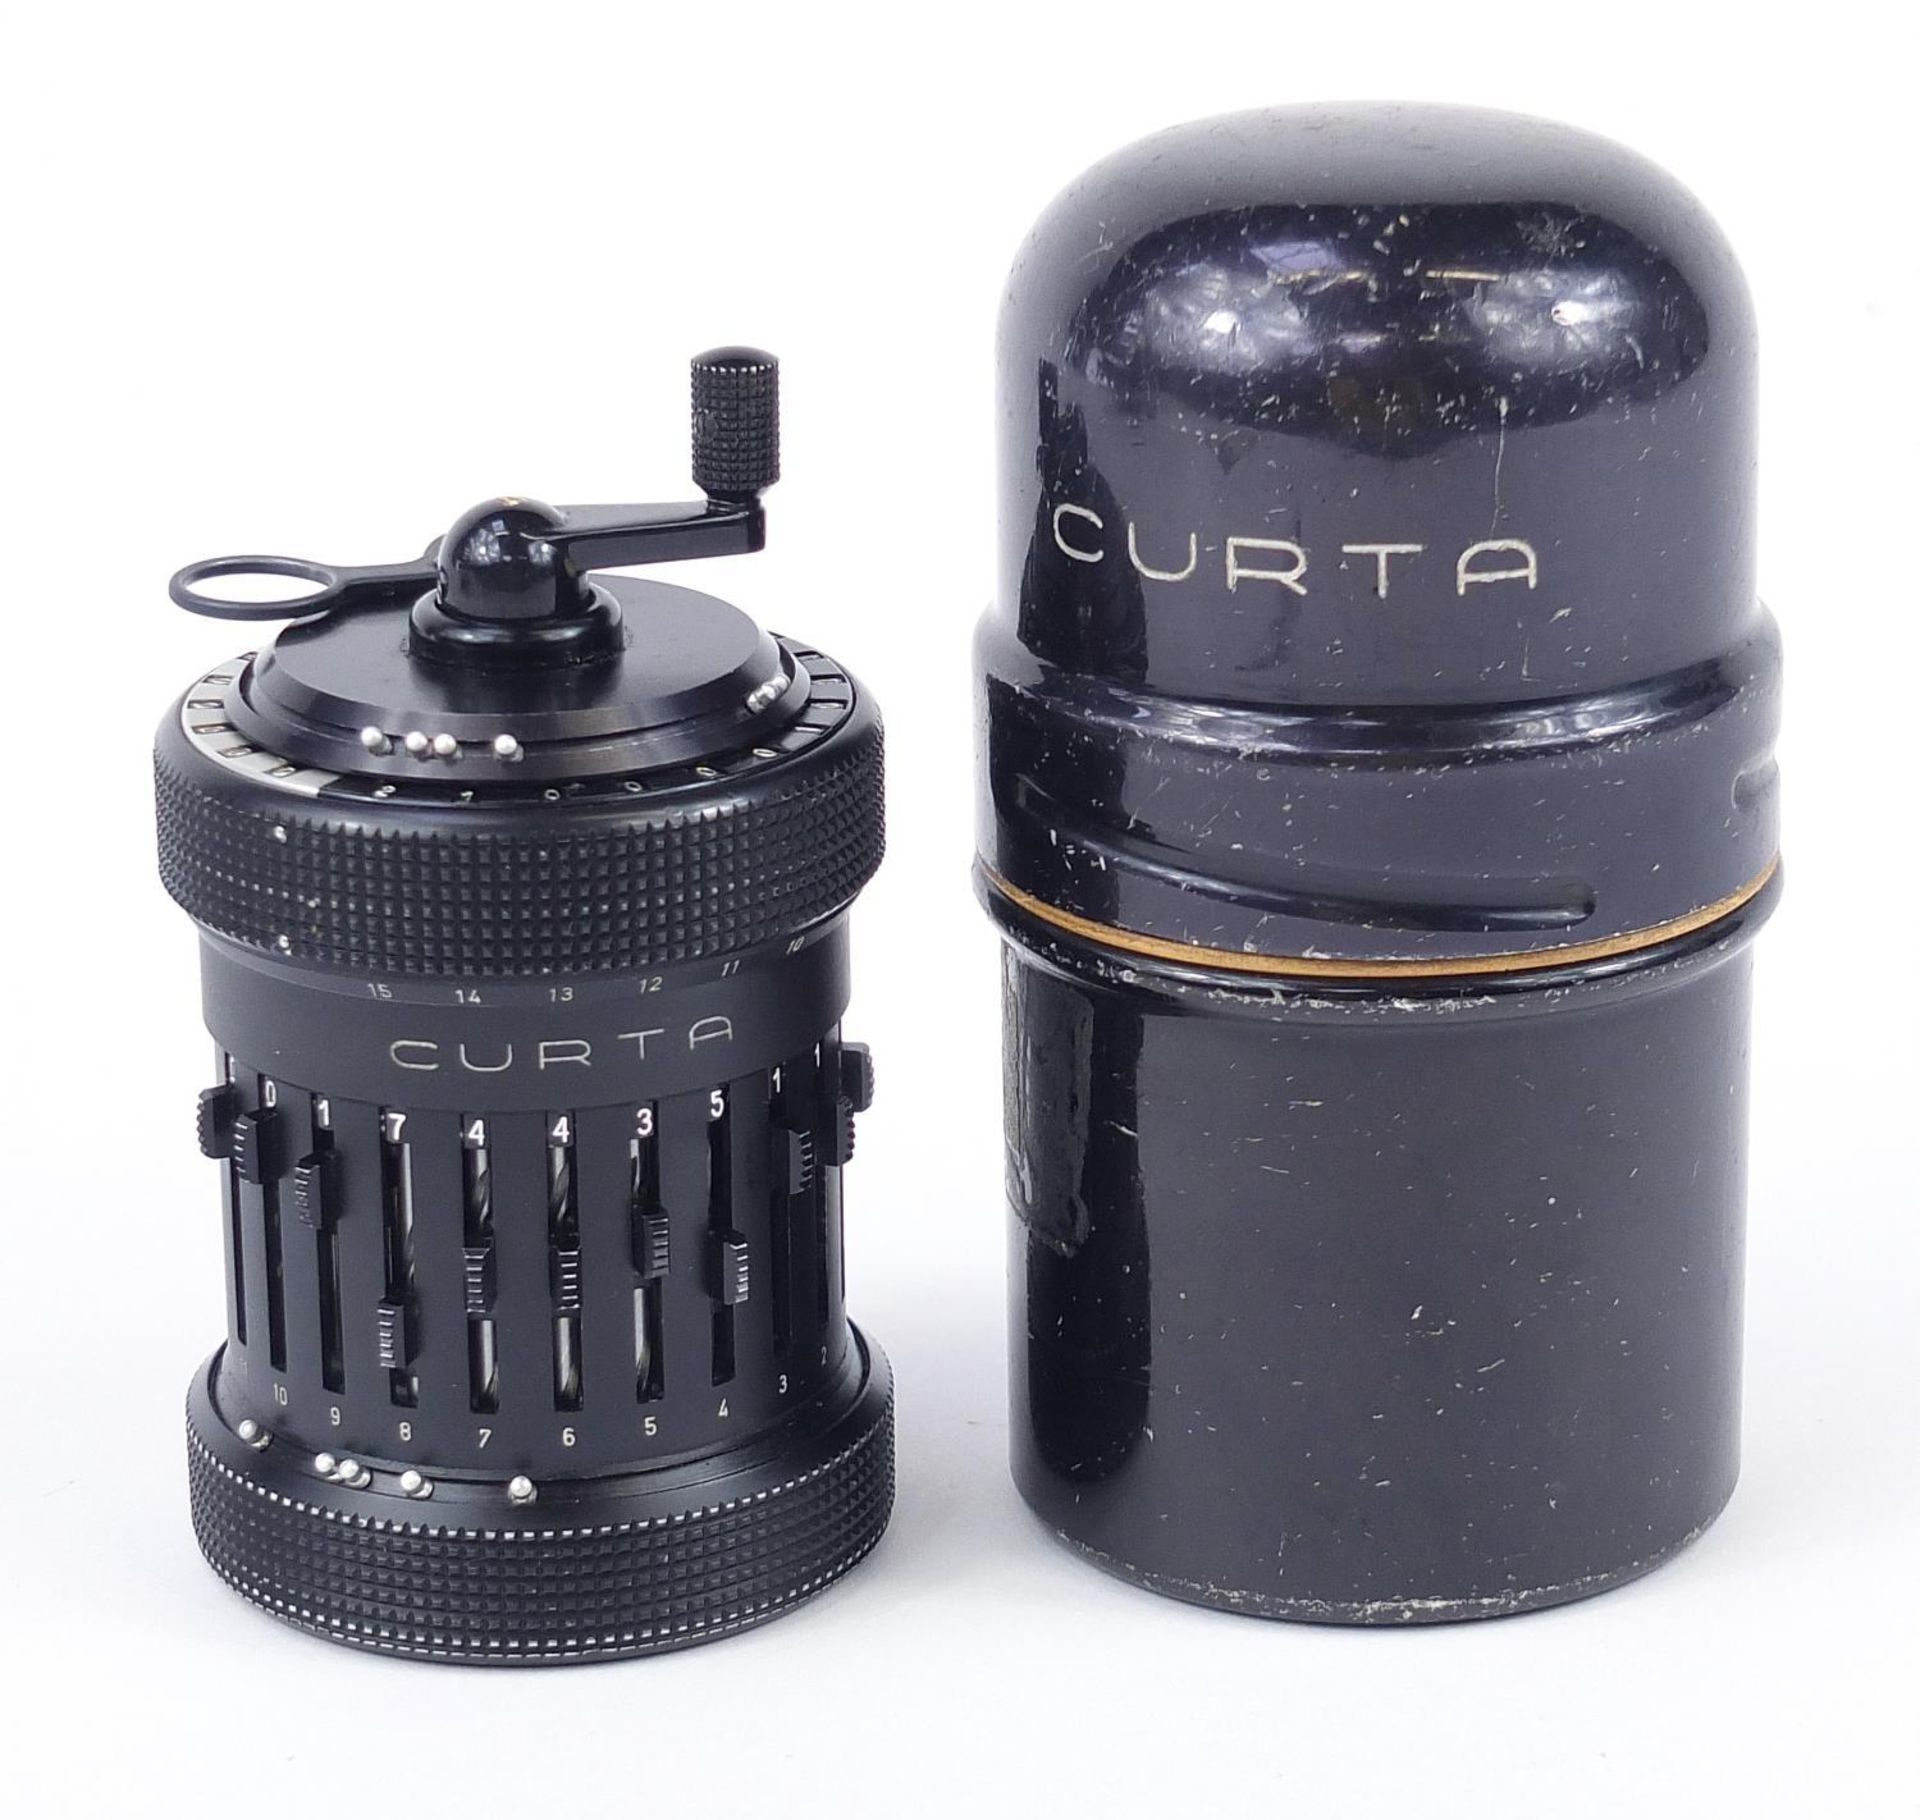 Vintage Curta calculator with instructions, serial number 510375 - Bild 2 aus 4